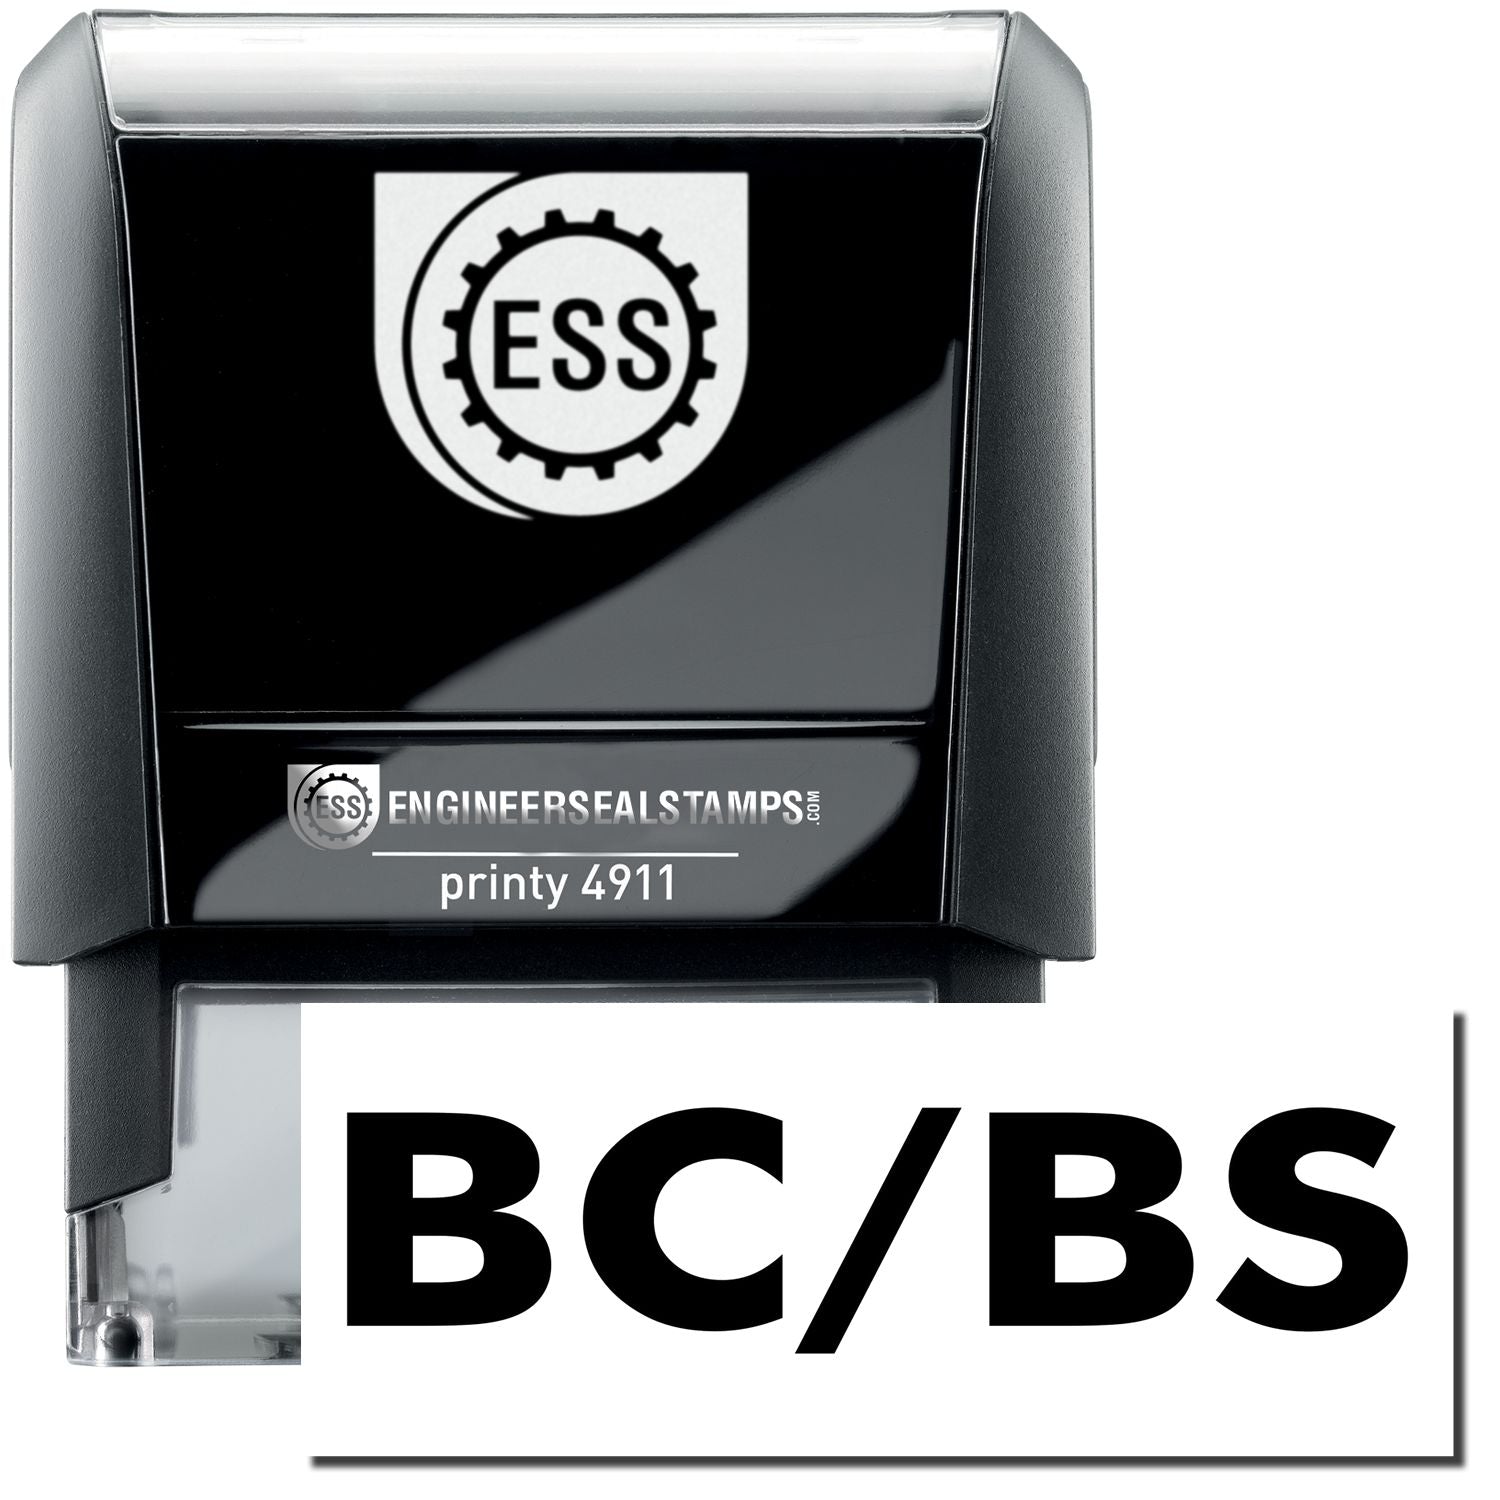 A self-inking stamp with a stamped image showing how the text "BC/BS" is displayed after stamping.